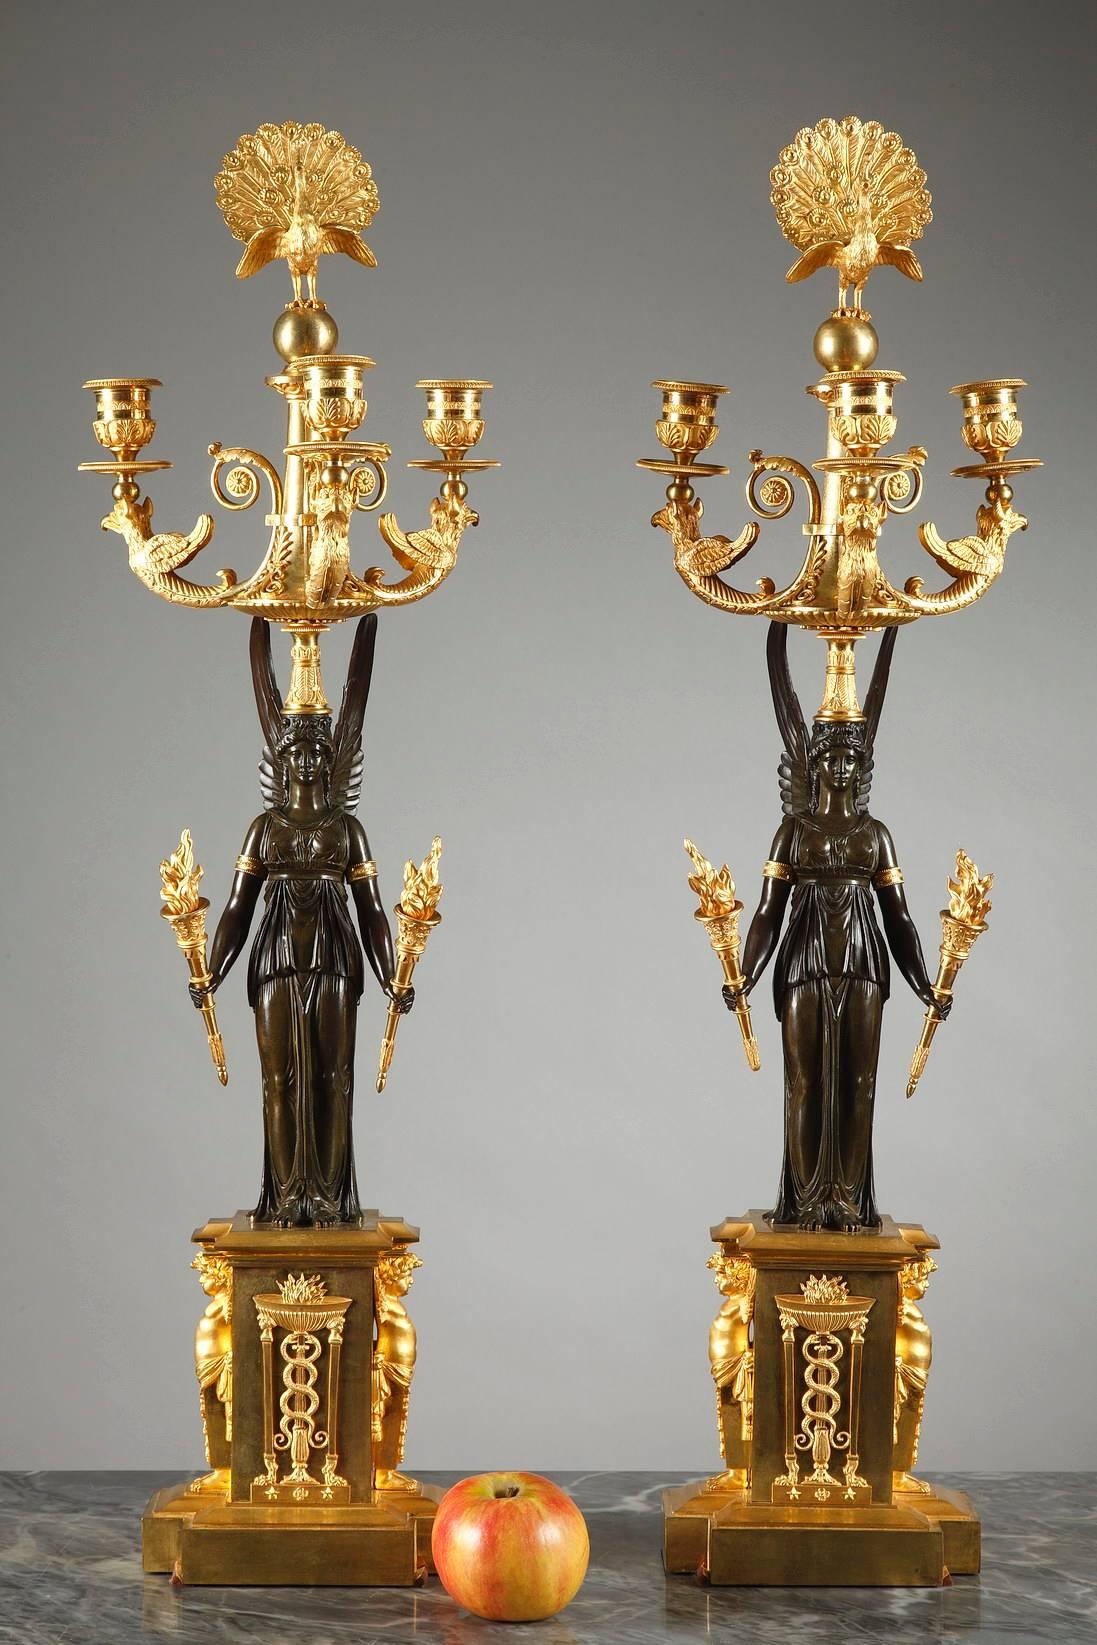 Impressive pair of gilt and sculpted bronze candelabras with three branches. The stem of each candelabrum is a patinated bronze form of the winged goddess, Victory, who holds a gilt bronze torch in each of her hands. Her head is topped with a gilt